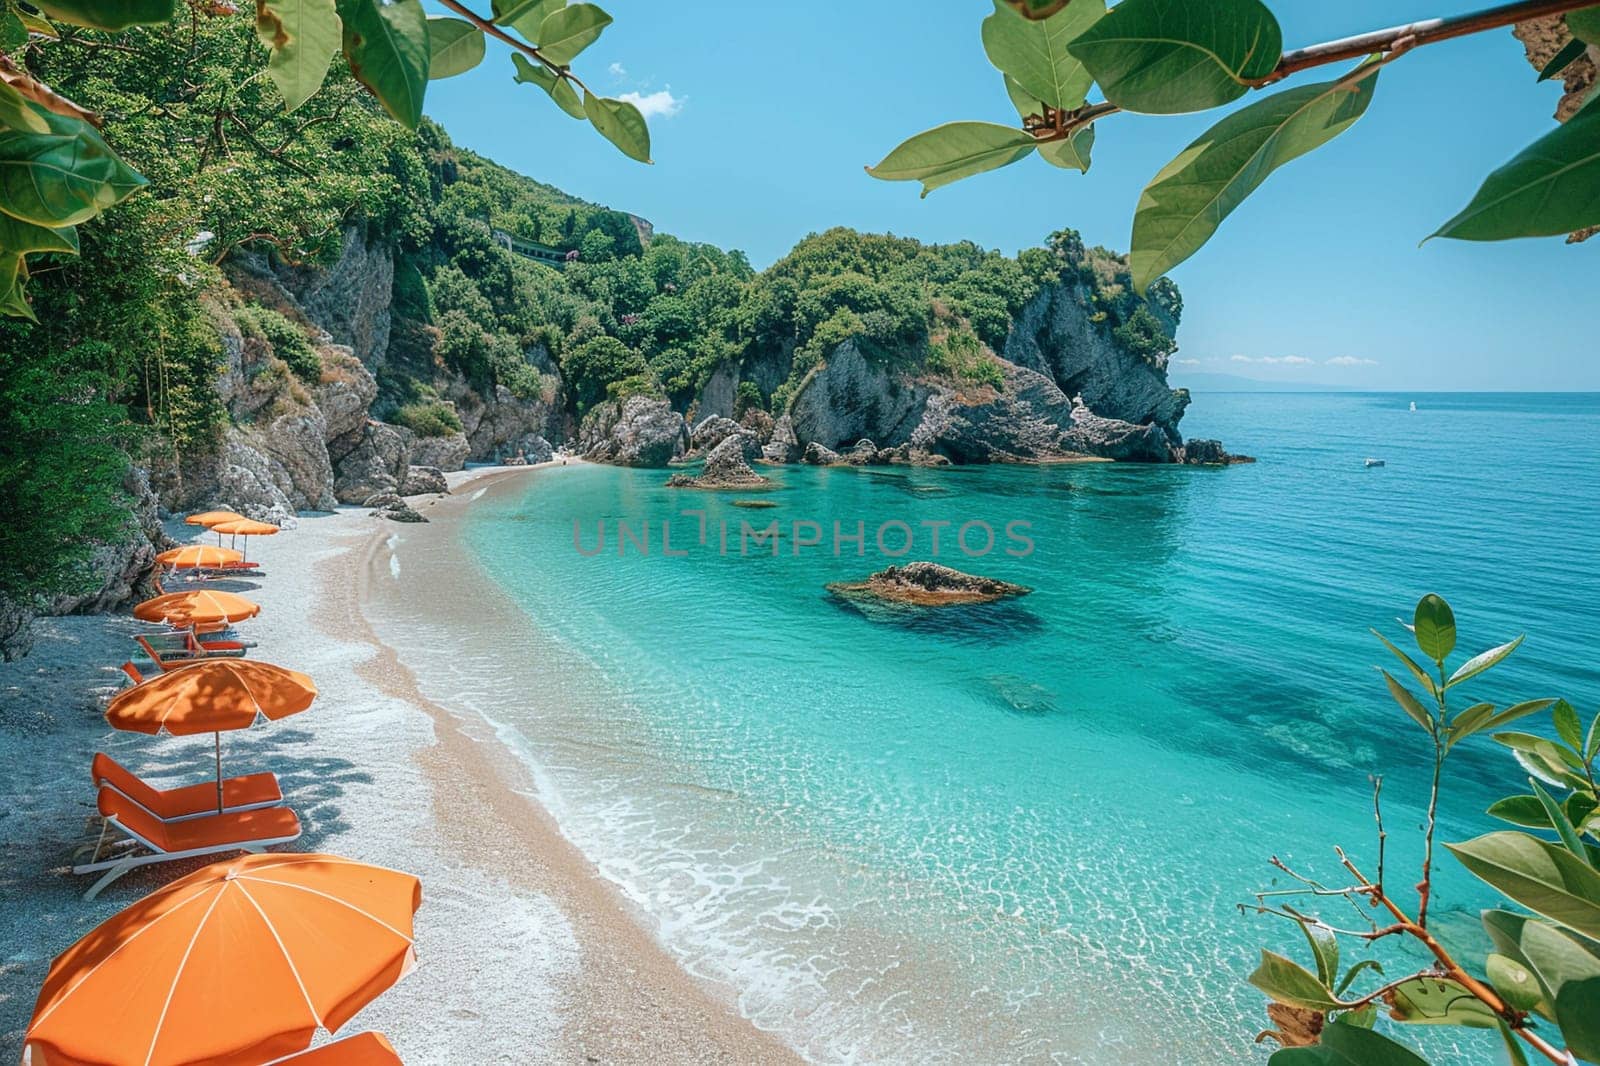 Naples, Ischia, Italy - locality of Barano di Ischia, panorama of the blue sea in summer.